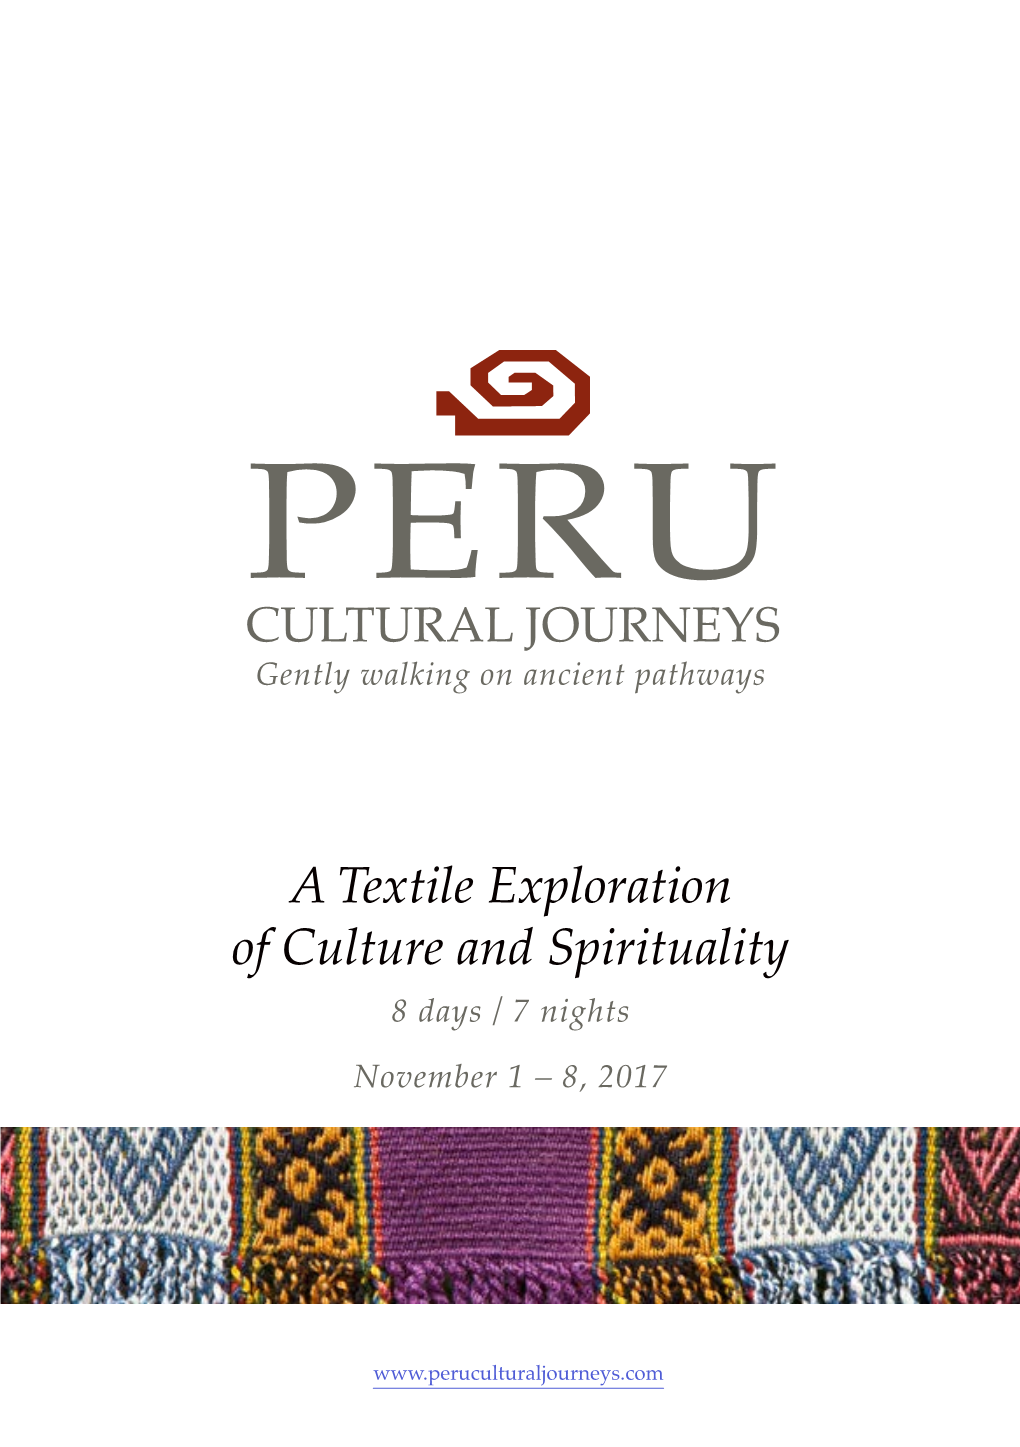 A Textile Exploration of Culture and Spirituality 8 Days / 7 Nights